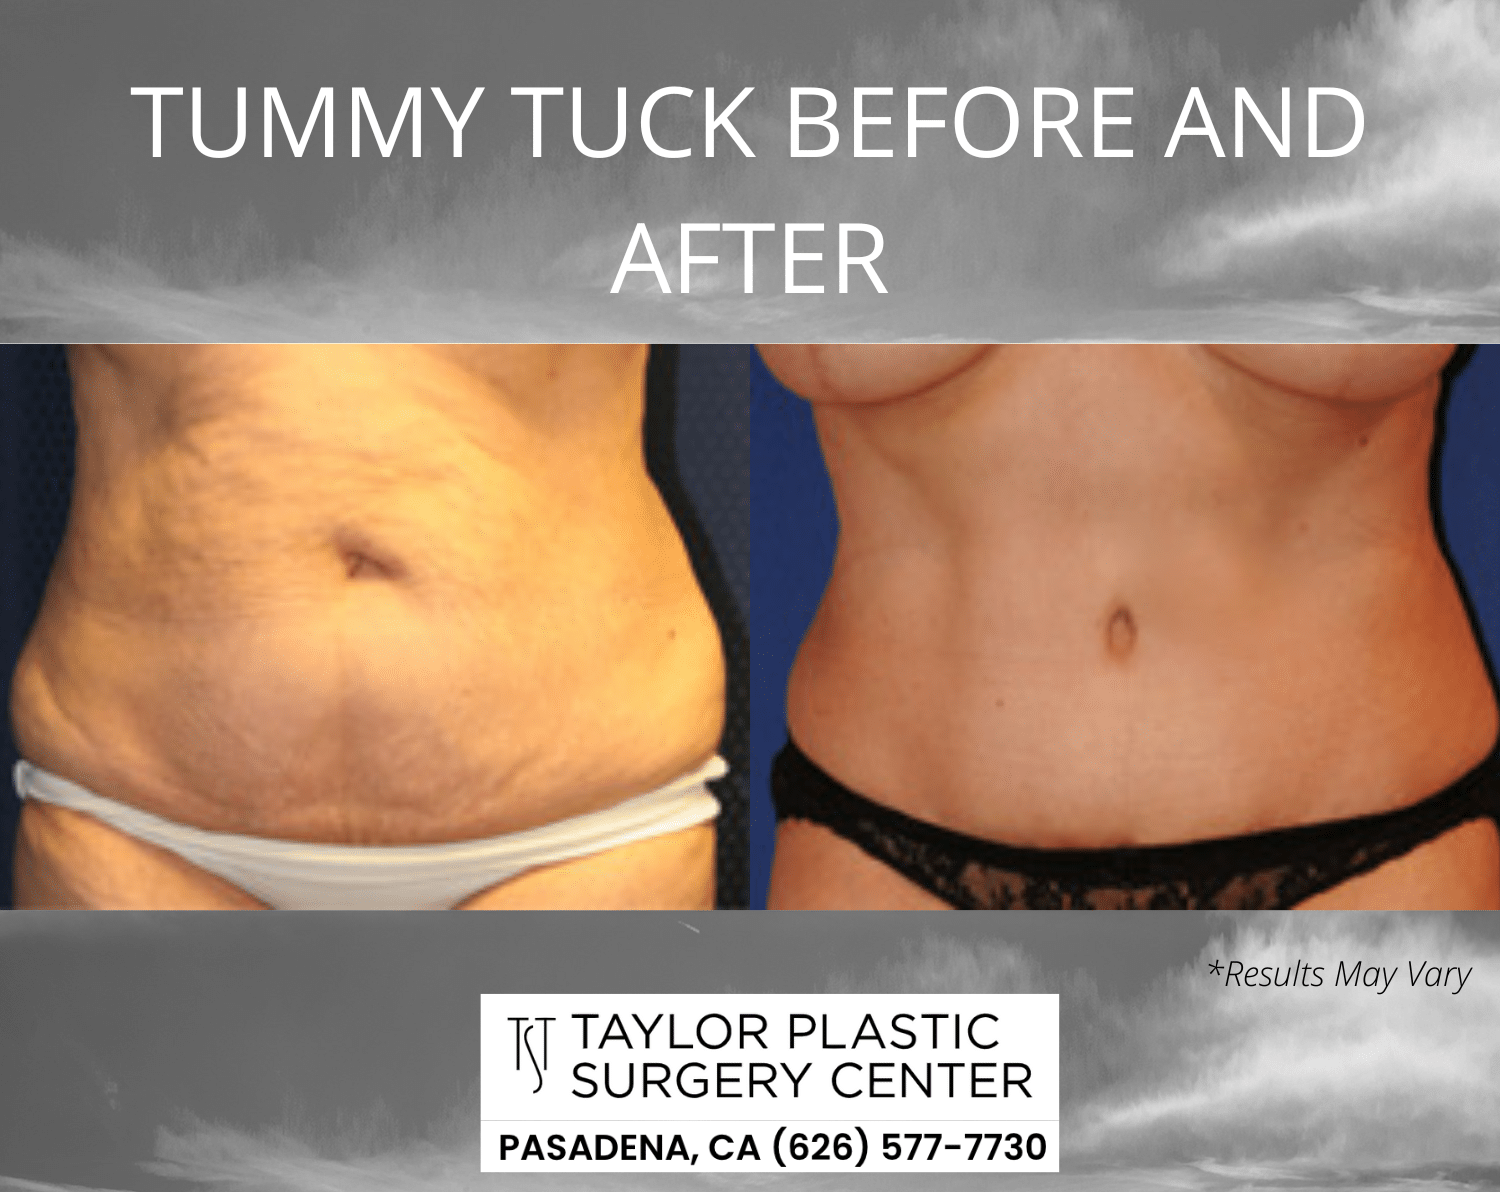 Tummy Tuck - Cost - Scar - Recovery - Northern Virginia